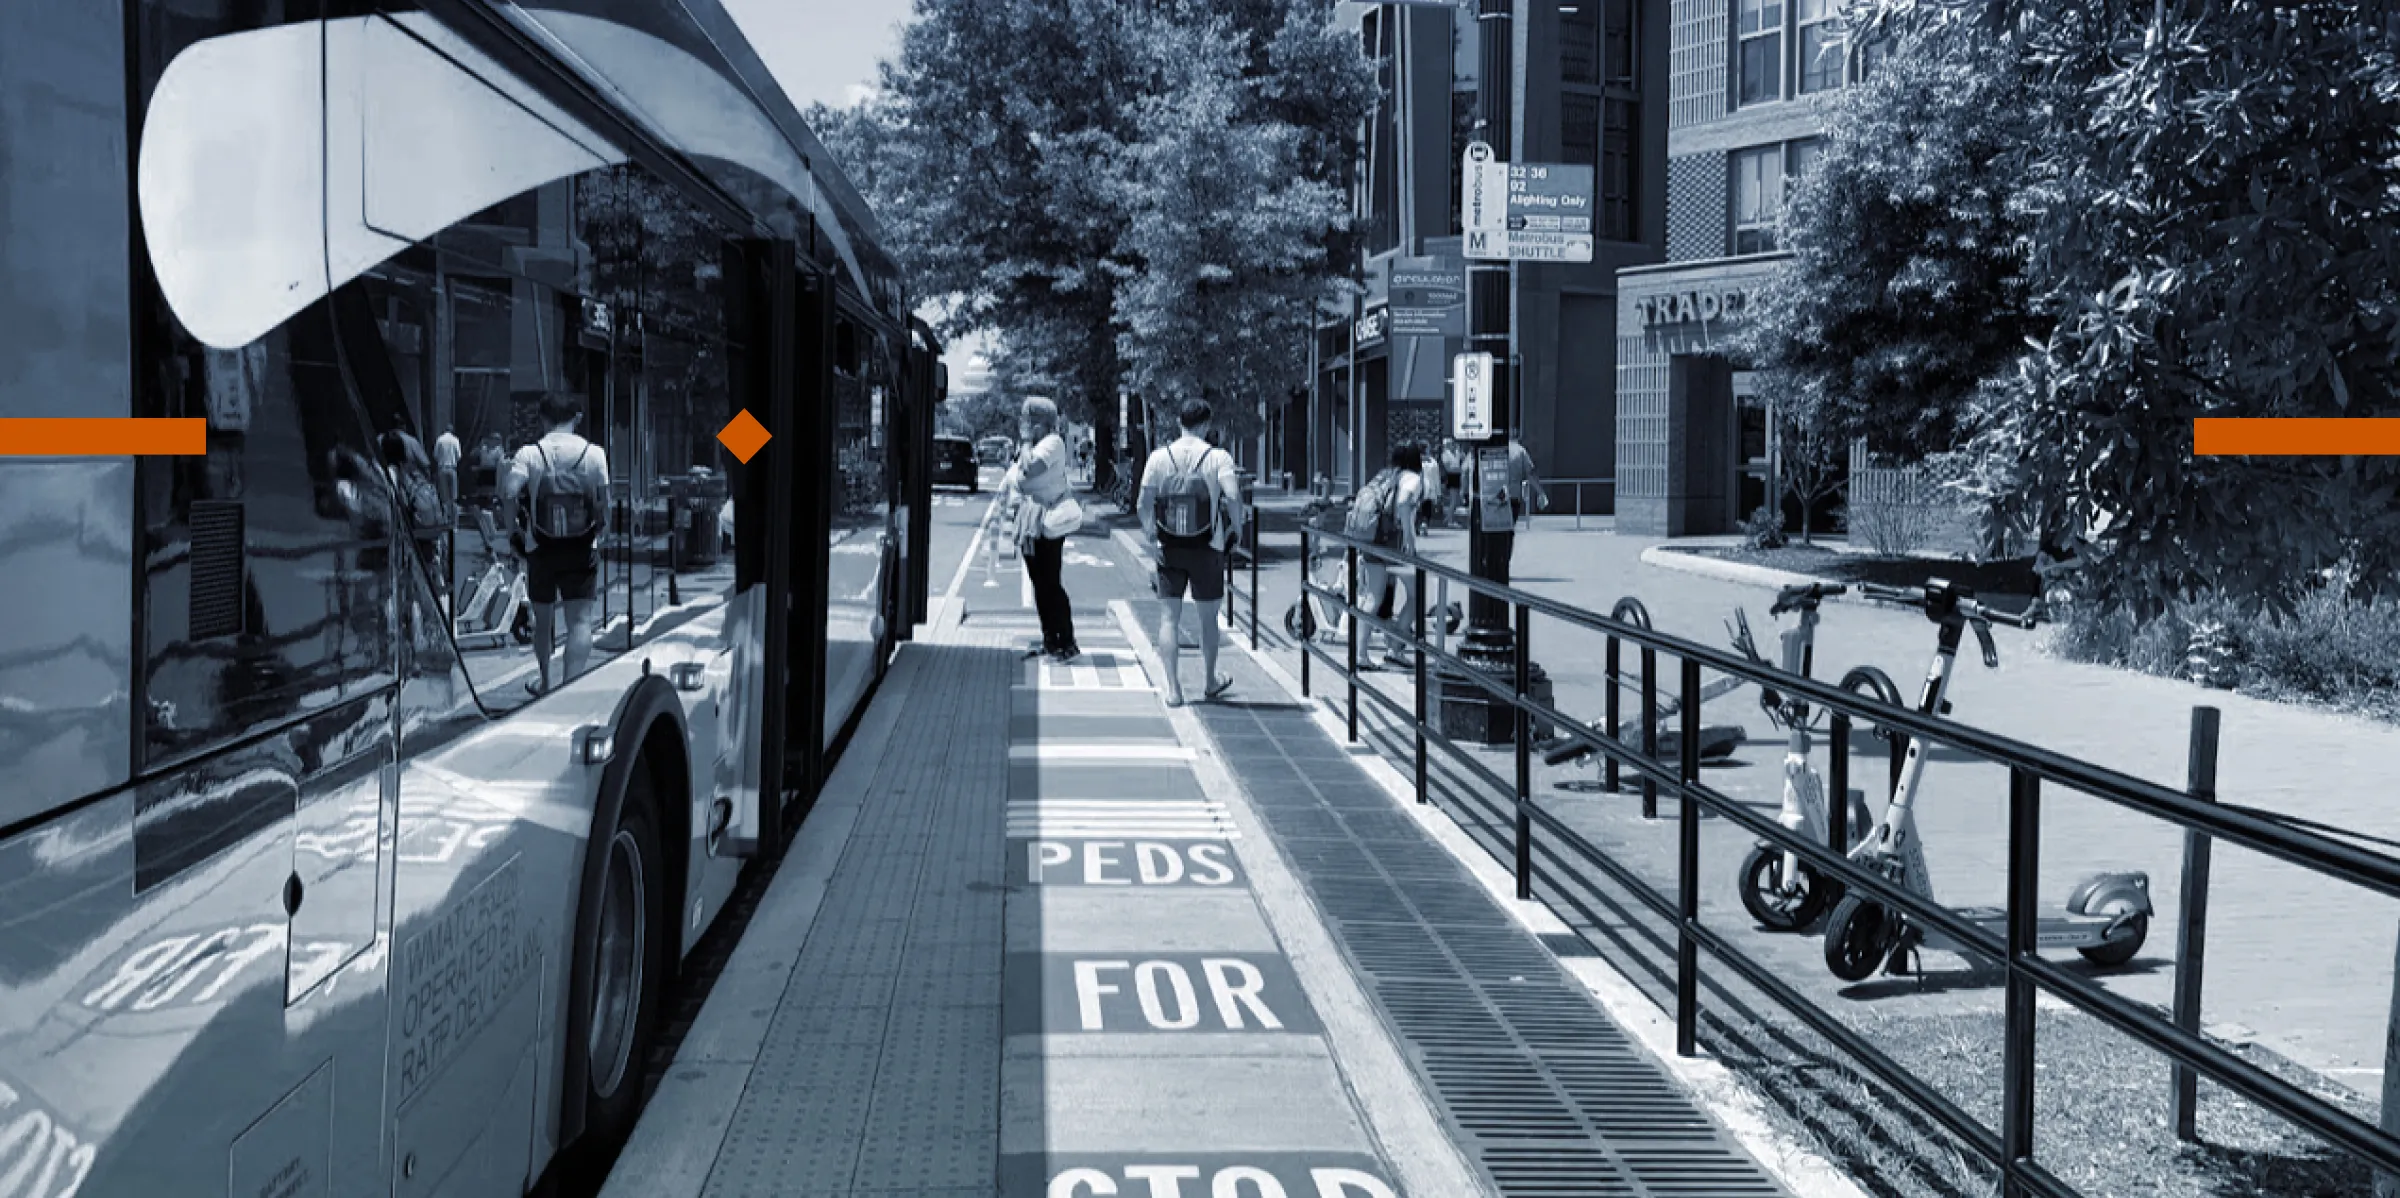 A photo of a bus stop with integrated bike lane. Passengers are boarding an arriving bus. Lettering on the bike lane surface reads "PEDS FOR STOP" in bright green stripes. Publicly-shared scooters are parked alongside the bike lane and bus stop.